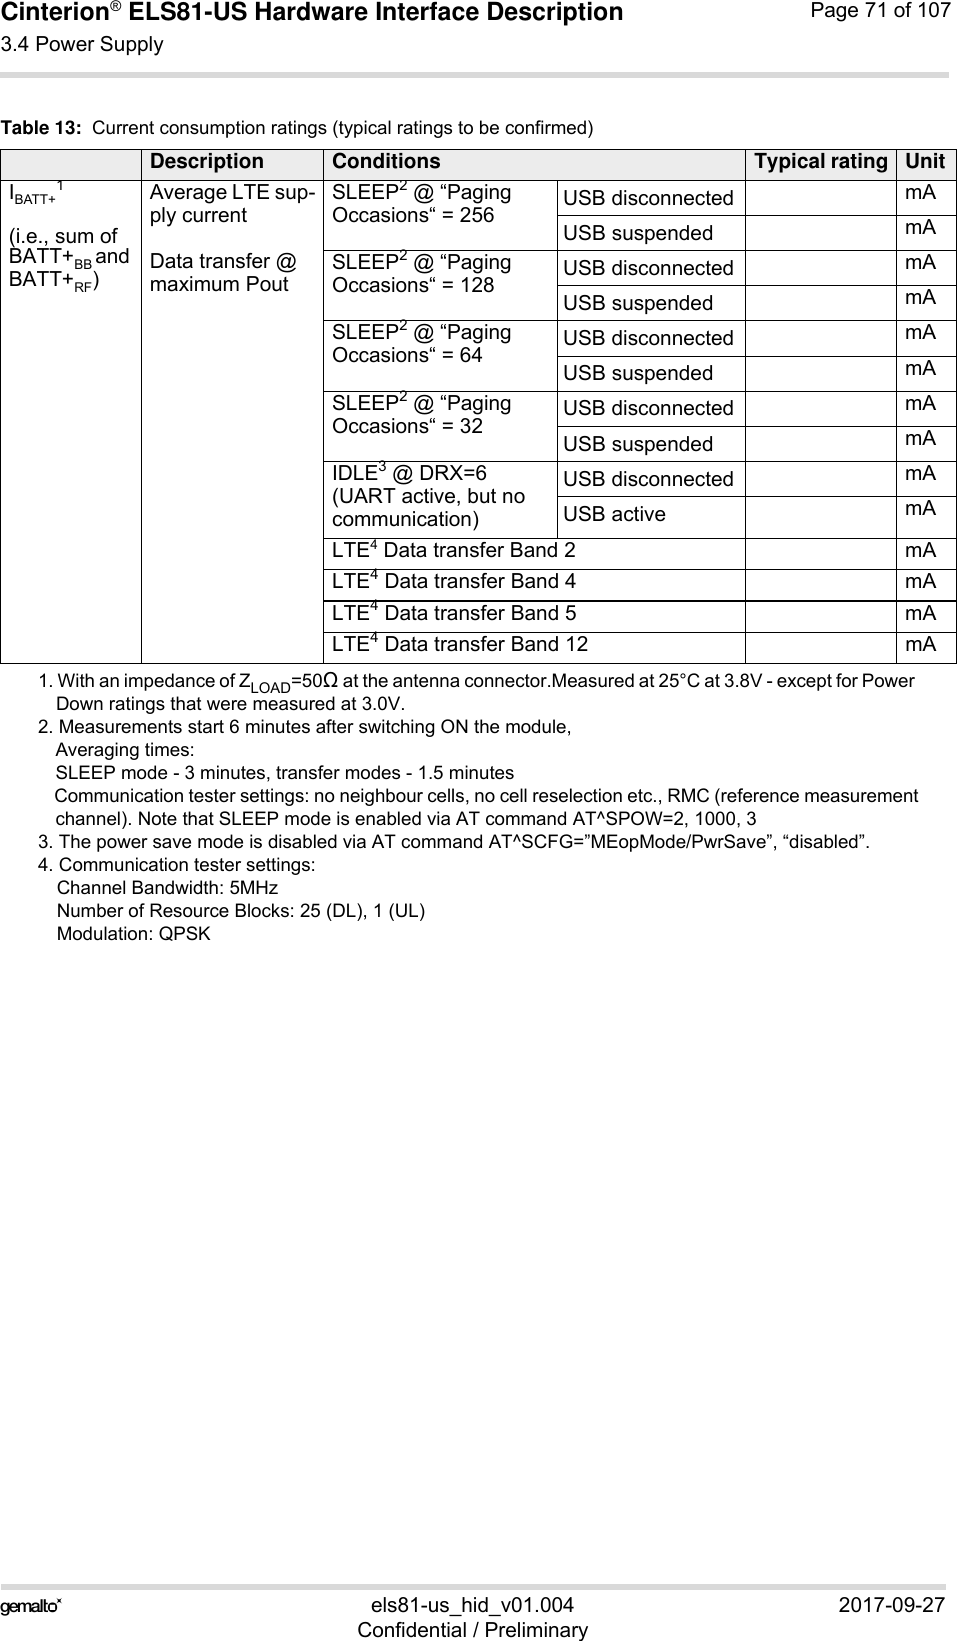 Cinterion® ELS81-US Hardware Interface Description3.4 Power Supply77els81-us_hid_v01.004 2017-09-27Confidential / PreliminaryPage 71 of 107IBATT+1(i.e., sum ofBATT+BB and BATT+RF) Average LTE sup-ply currentData transfer @ maximum PoutSLEEP2 @ “Paging Occasions“ = 256 USB disconnected mAUSB suspended mASLEEP2 @ “Paging Occasions“ = 128 USB disconnected mAUSB suspended mASLEEP2 @ “Paging Occasions“ = 64 USB disconnected mAUSB suspended mASLEEP2 @ “Paging Occasions“ = 32 USB disconnected mAUSB suspended mAIDLE3 @ DRX=6(UART active, but no communication) USB disconnected mAUSB active mALTE4 Data transfer Band 2 mALTE4 Data transfer Band 4 mALTE4 Data transfer Band 5 mALTE4 Data transfer Band 12 mA1. With an impedance of ZLOAD=50 at the antenna connector.Measured at 25°C at 3.8V - except for Power Down ratings that were measured at 3.0V. 2. Measurements start 6 minutes after switching ON the module,Averaging times: SLEEP mode - 3 minutes, transfer modes - 1.5 minutesCommunication tester settings: no neighbour cells, no cell reselection etc., RMC (reference measurementchannel). Note that SLEEP mode is enabled via AT command AT^SPOW=2, 1000, 33. The power save mode is disabled via AT command AT^SCFG=”MEopMode/PwrSave”, “disabled”. 4. Communication tester settings: Channel Bandwidth: 5MHzNumber of Resource Blocks: 25 (DL), 1 (UL)Modulation: QPSKTable 13:  Current consumption ratings (typical ratings to be confirmed)Description Conditions Typical rating Unit